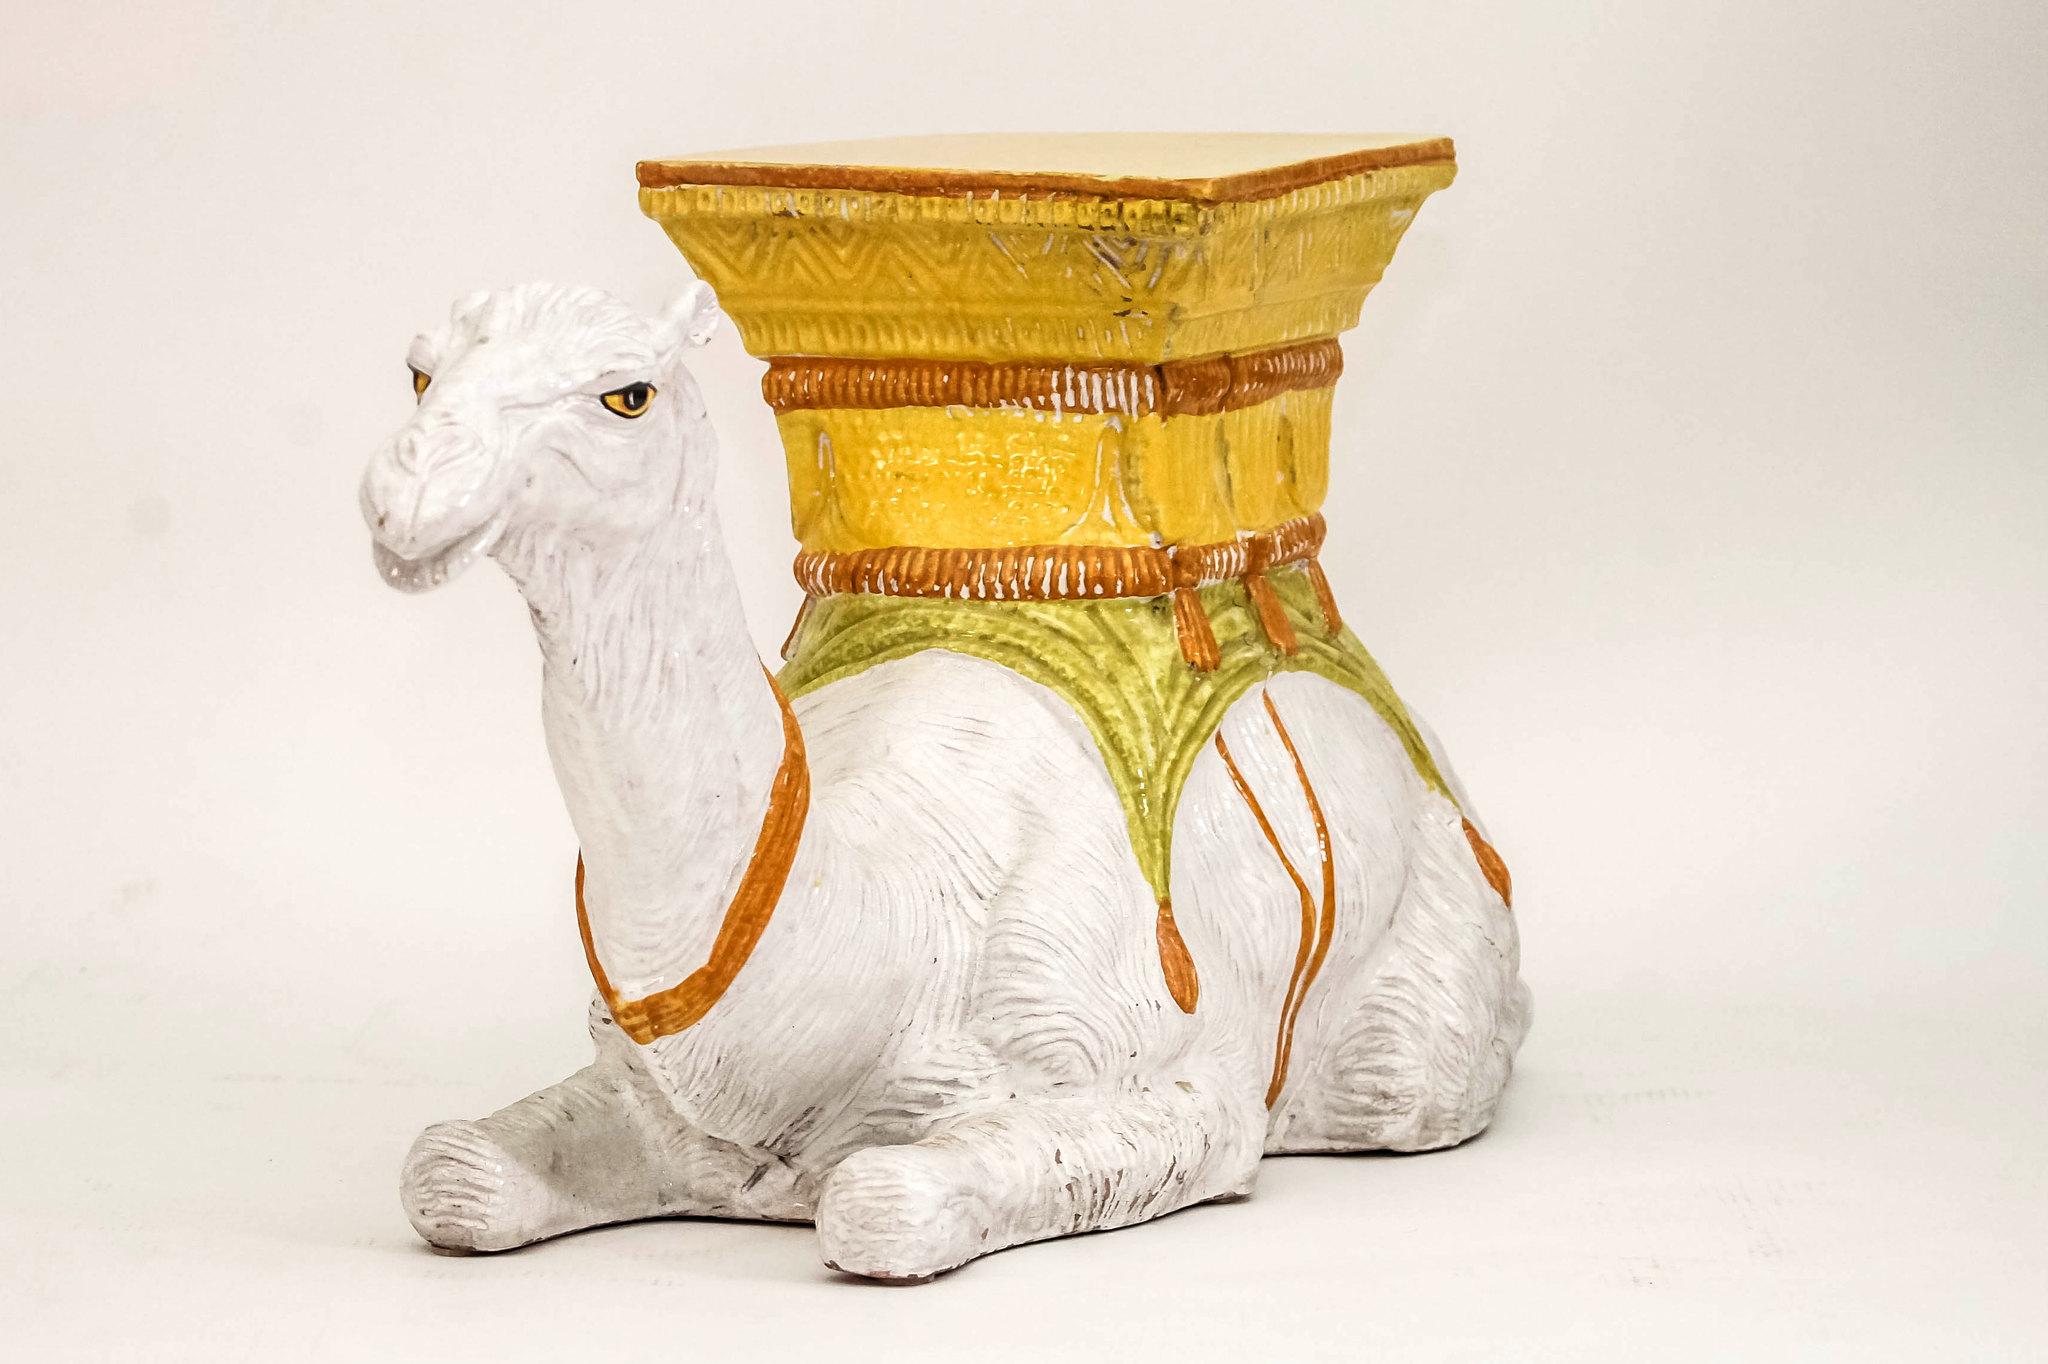 Vintage Italian camel garden seat. Highly decorative terra cotta in white, yellow, orange, red and chartreuse.
 